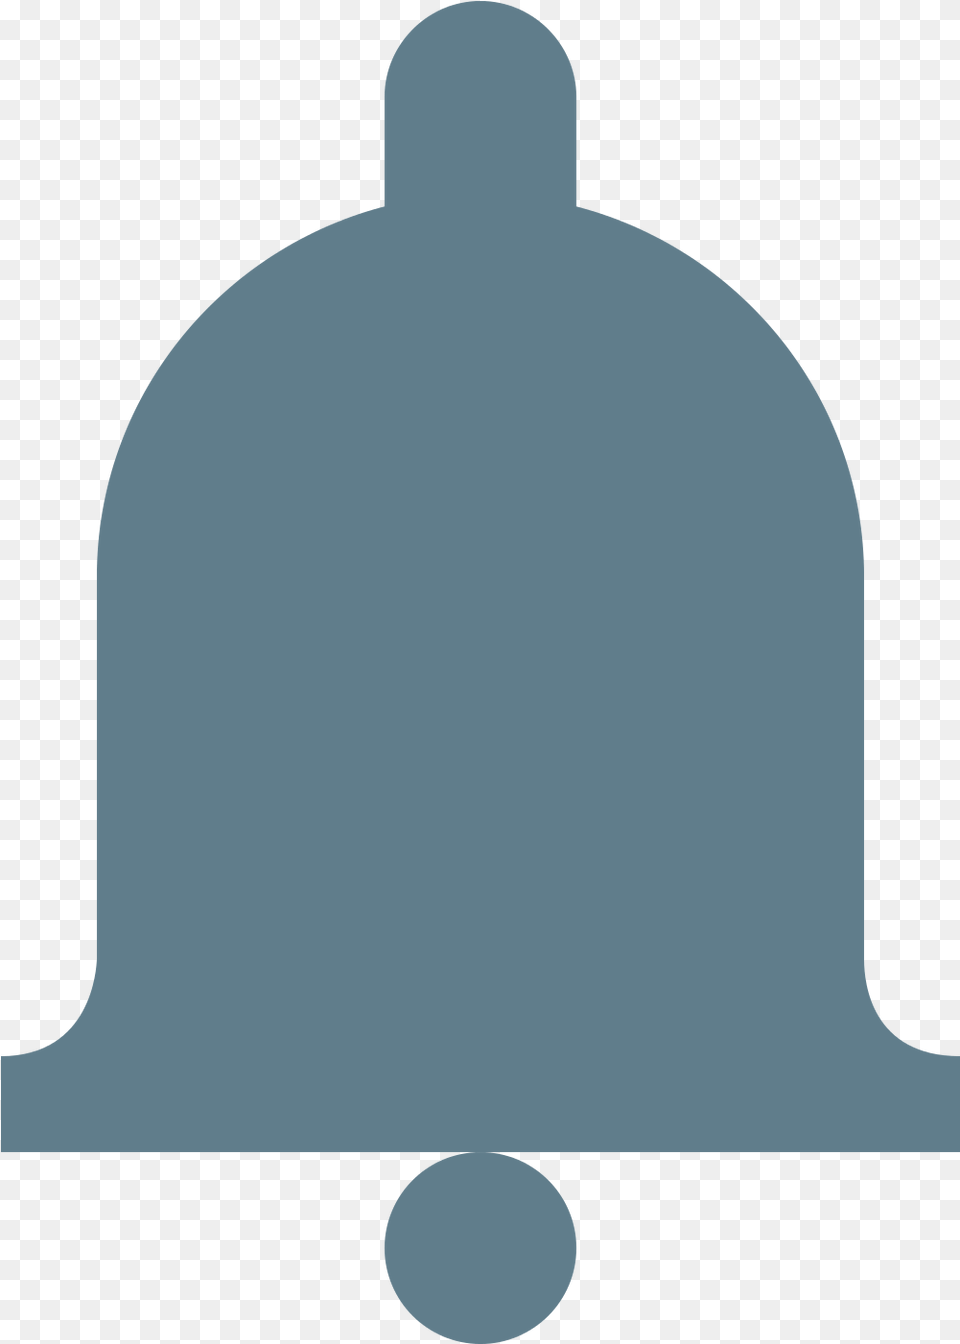 Notification Bell Small Youtube Bell Icon Transparent Ghanta, Clothing, Hardhat, Helmet, Adult Png Image